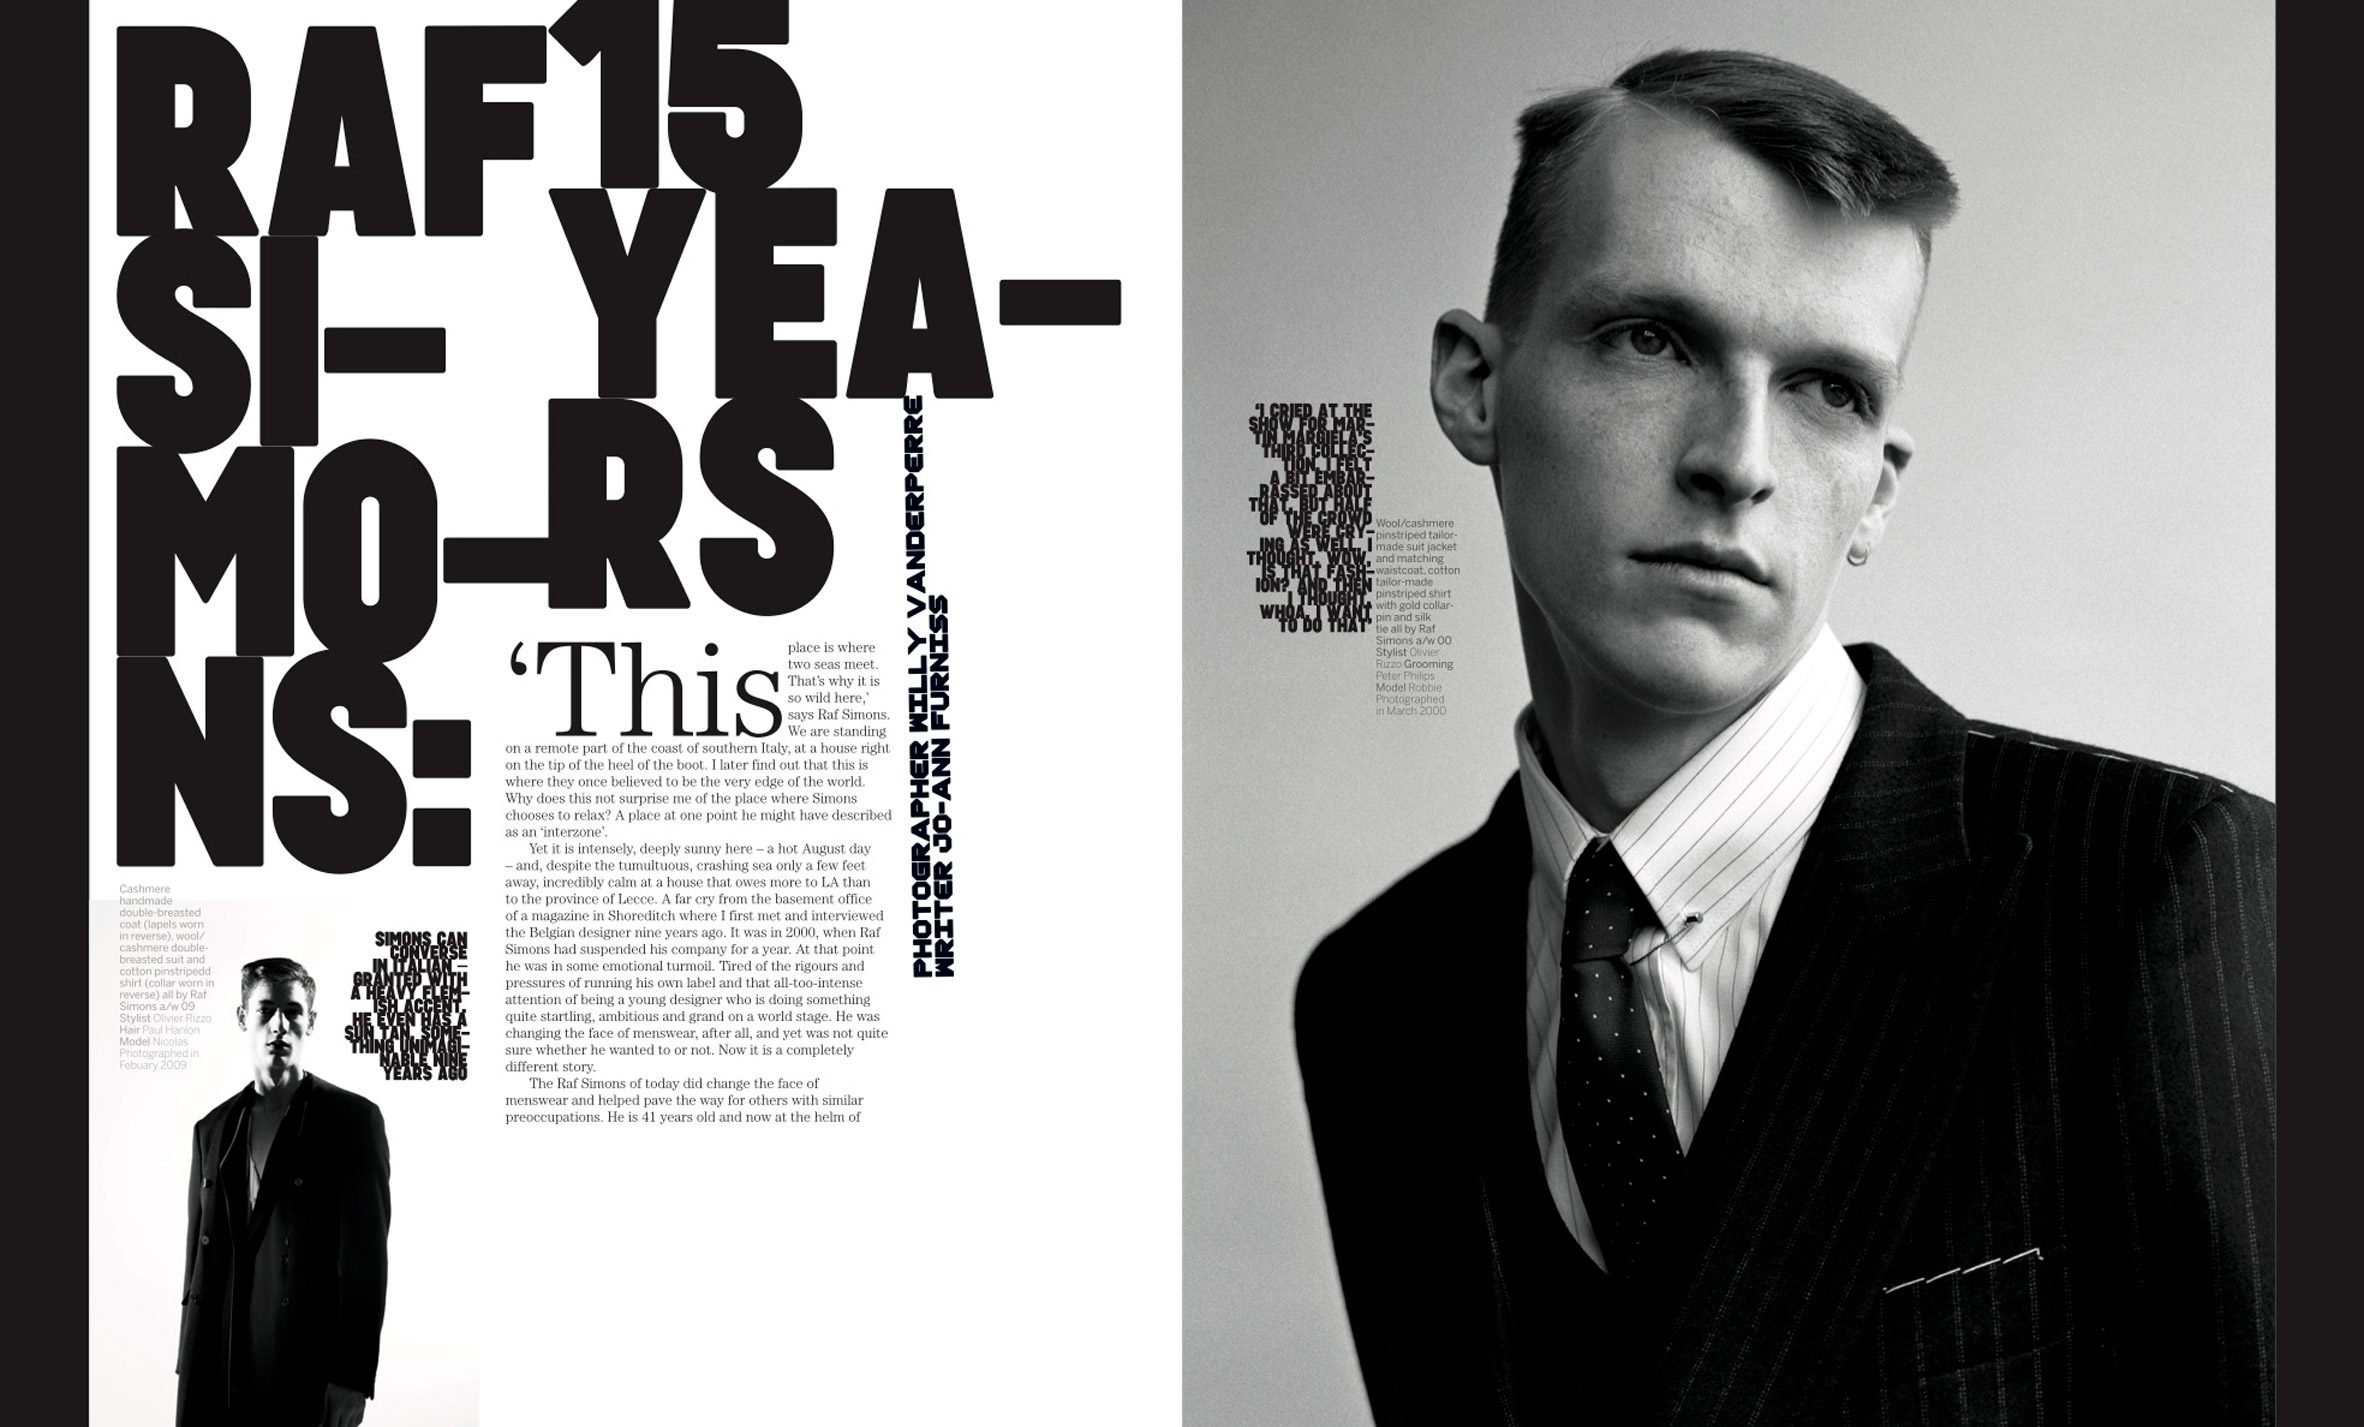 The Graphic Language of Neville Brody, page spread showing Arena Homme +